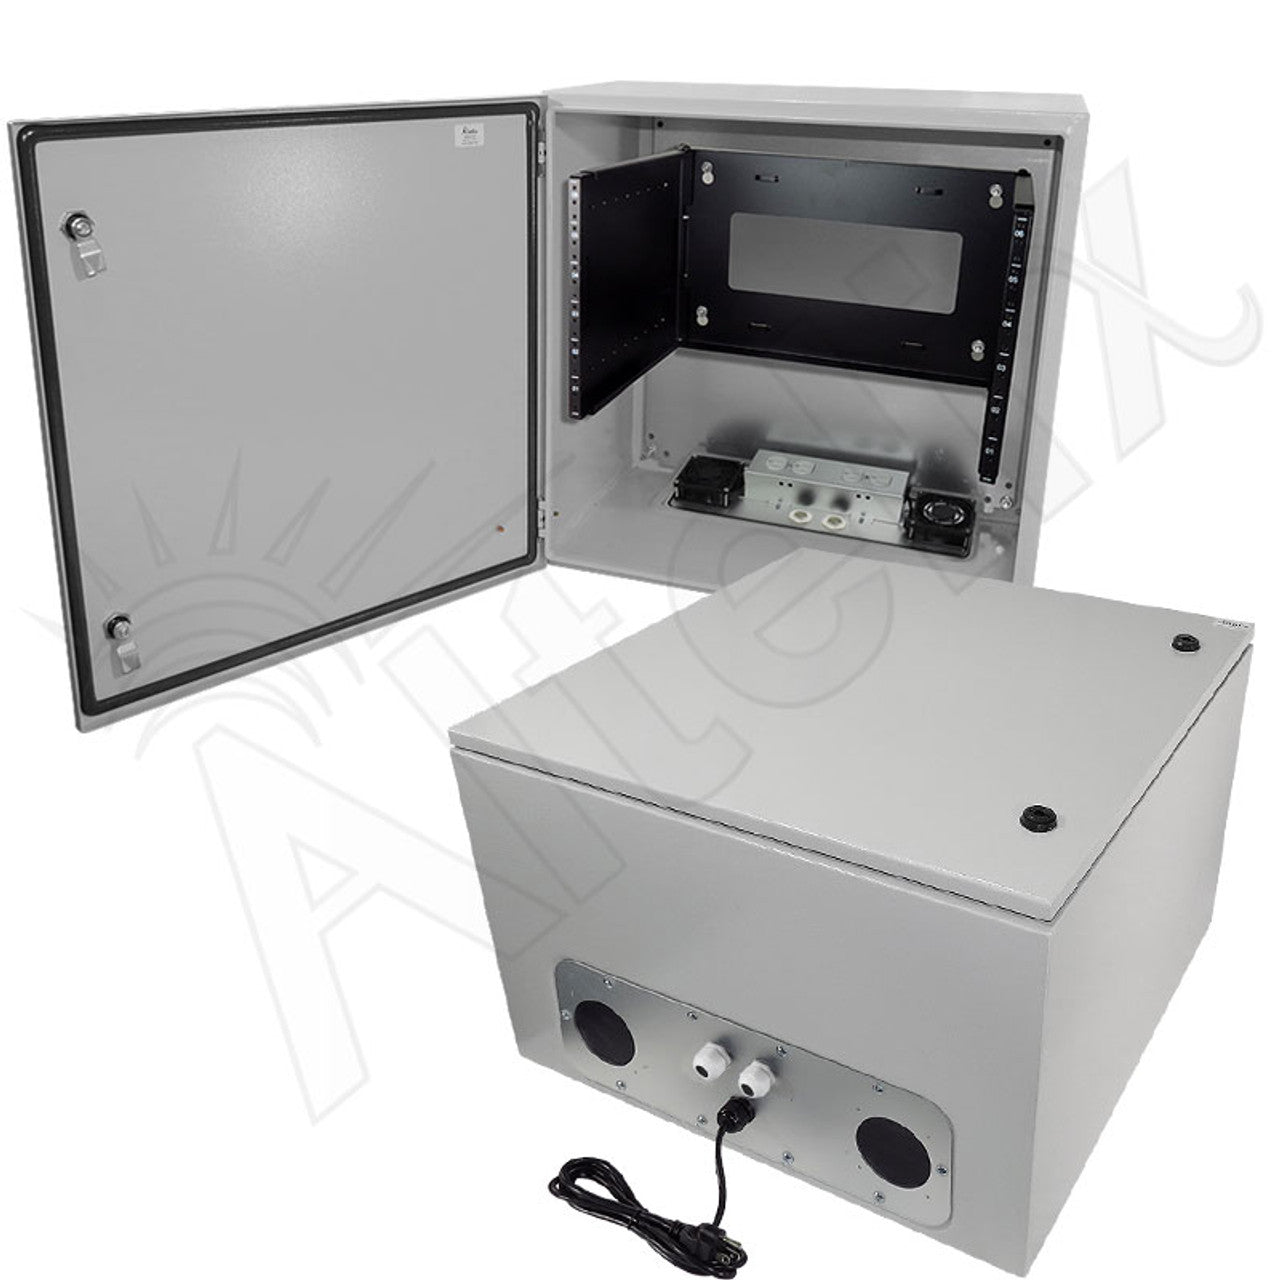 Altelix 19" Wide 6U Rack Steel Weatherproof NEMA Enclosure with Dual Cooling Fans, 120 VAC Outlets and Power Cord - 0